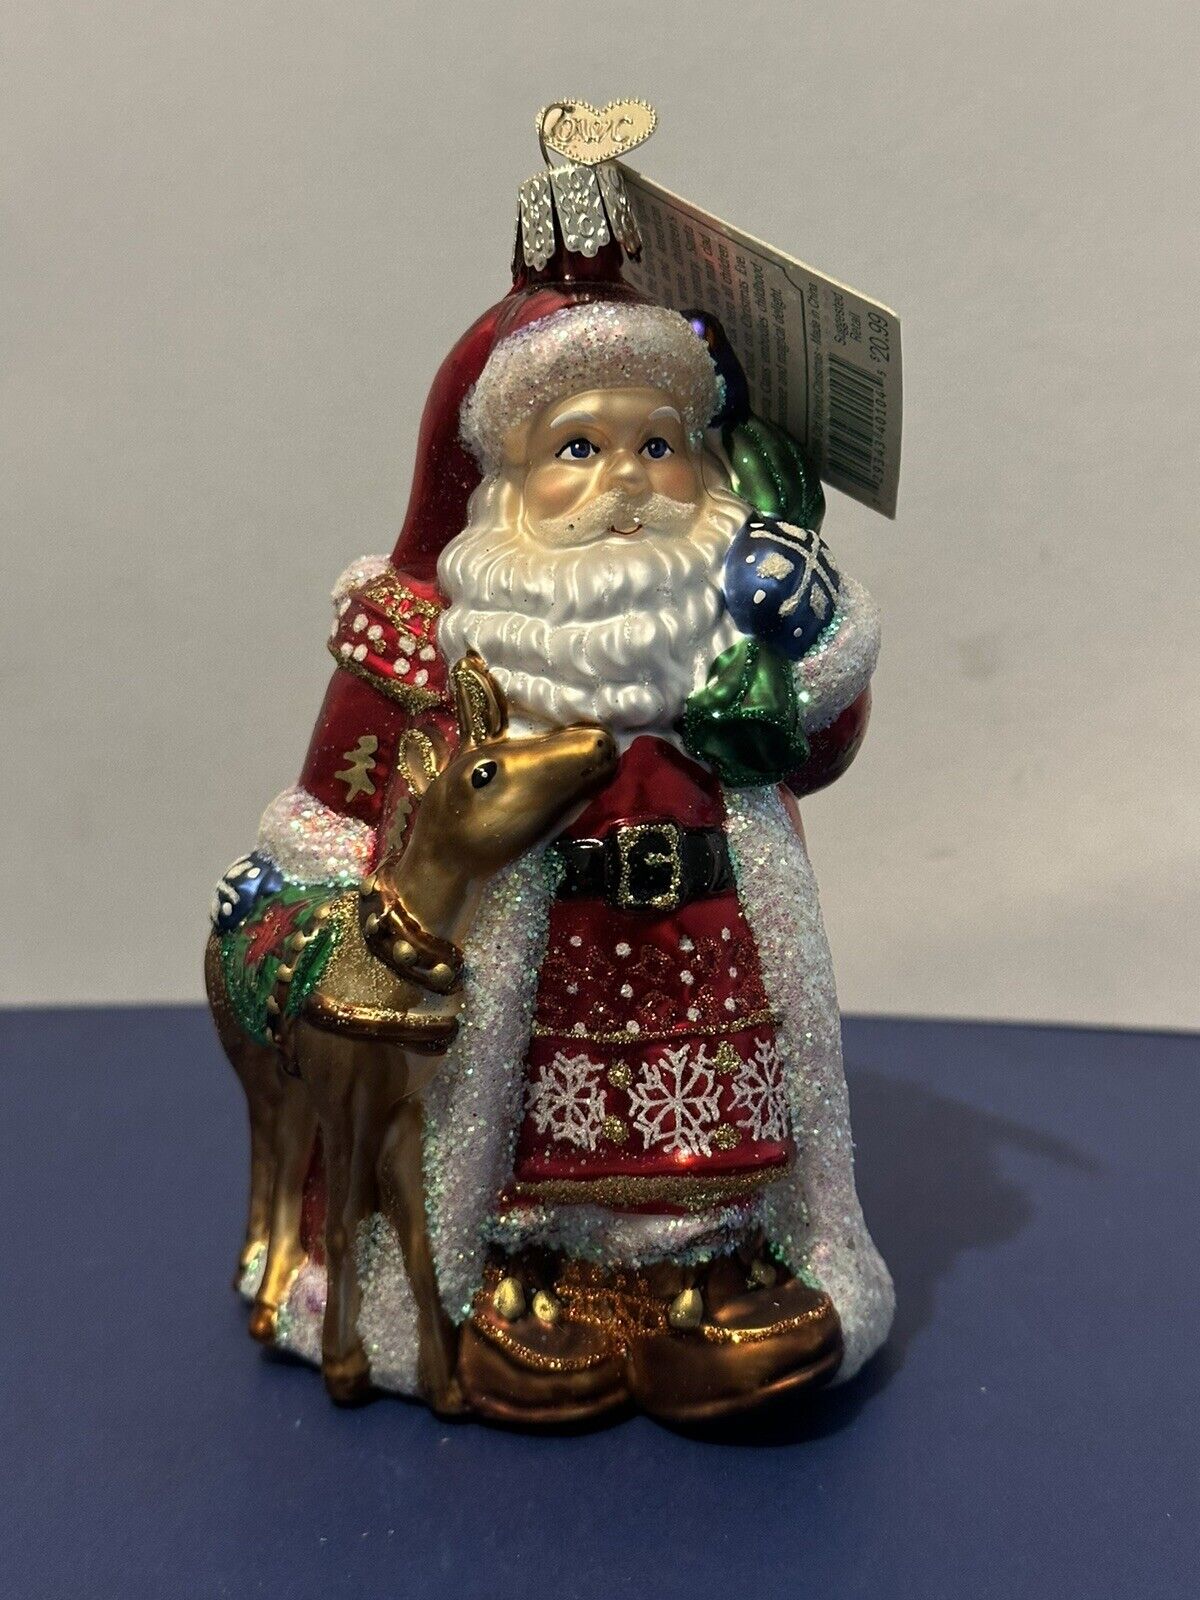 2 Old World Christmas Glass Ornaments With Tags: Hot Dog & Nordic Santa